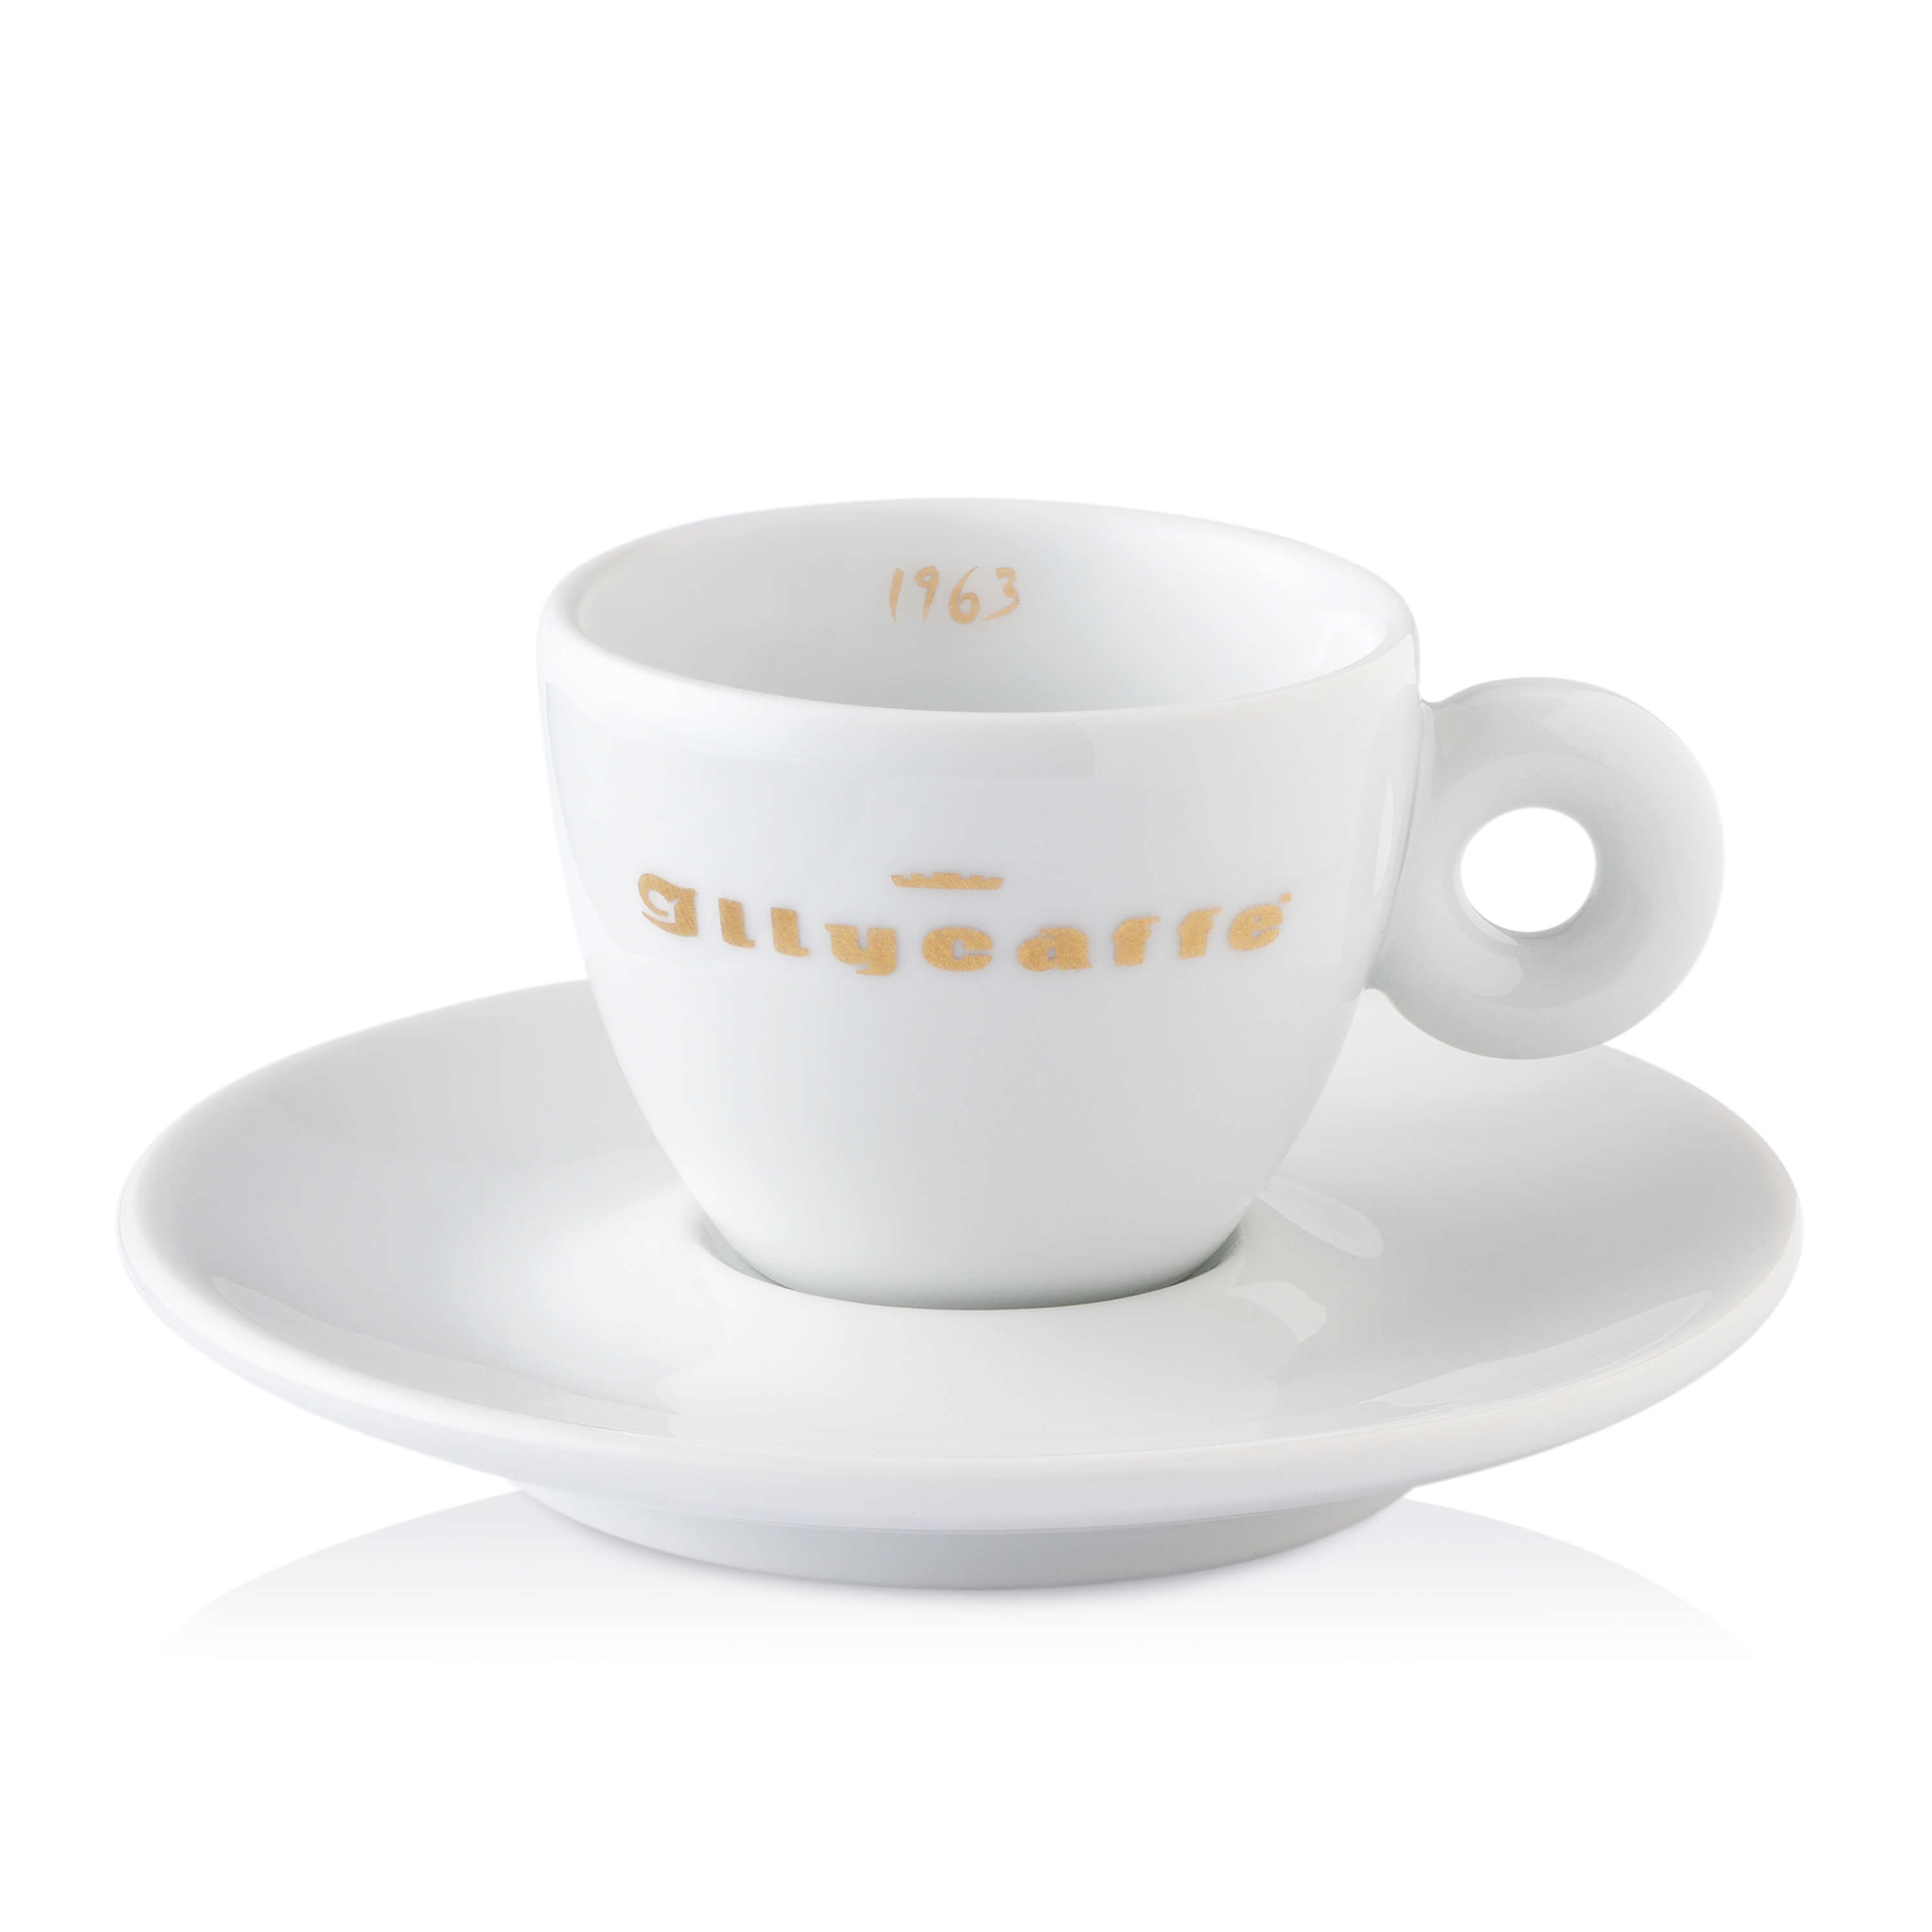 illy Art Collection HERITAGE Gift Set 6 Espresso Cups, Cups, 02-02-6030